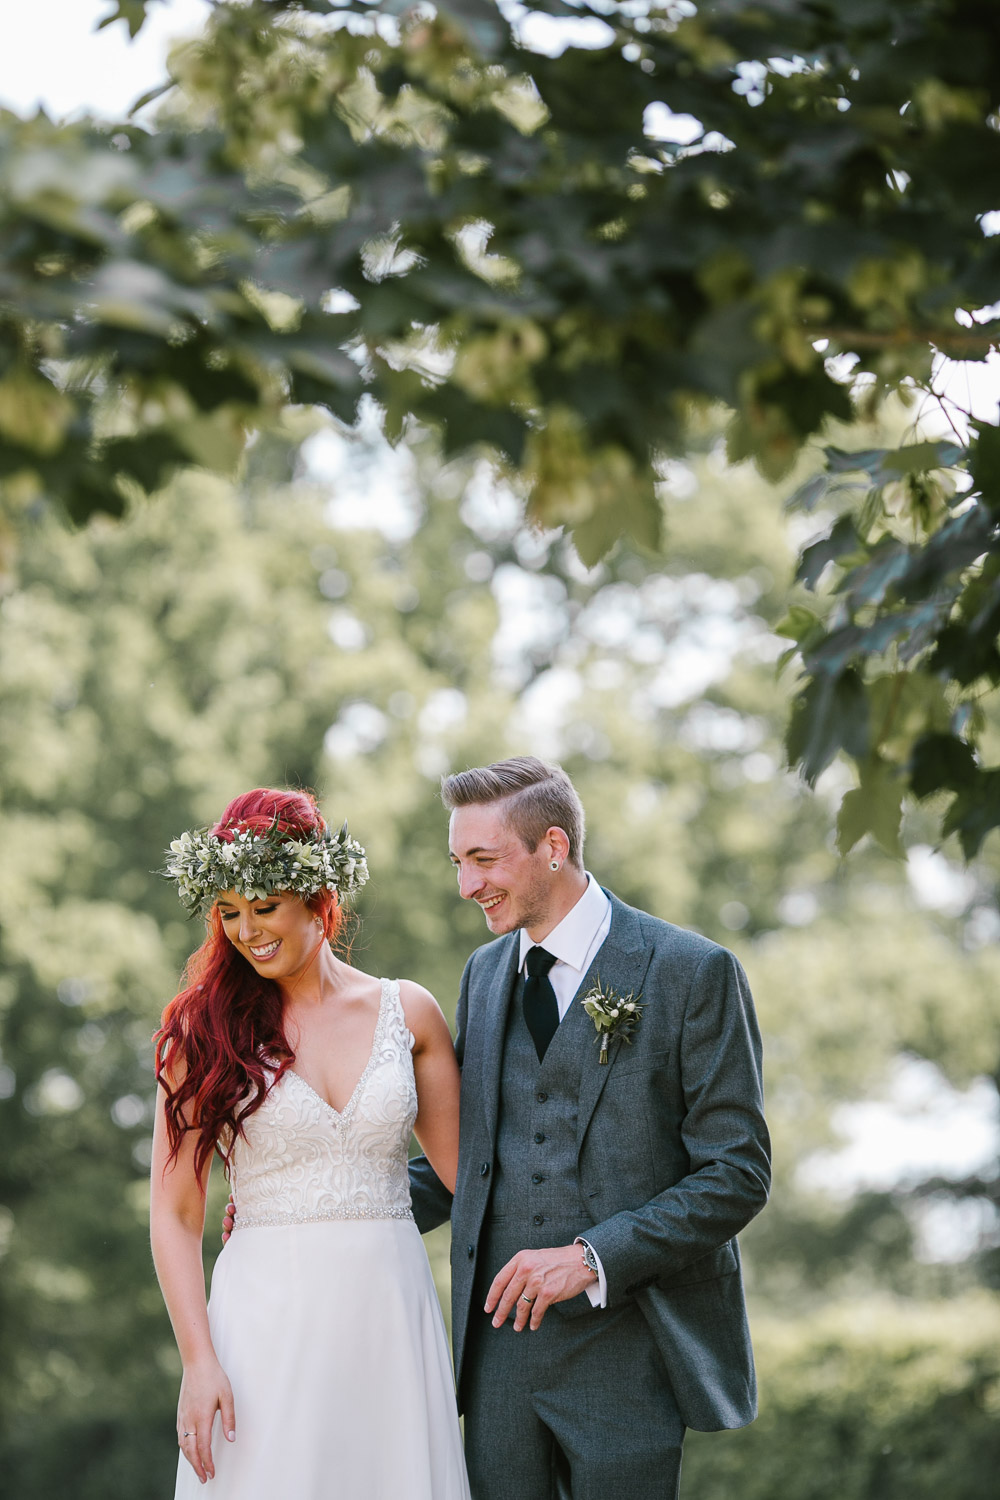 The Red Barn Lingfield, Flower crown, Danielle Victoria Photography-86.jpg